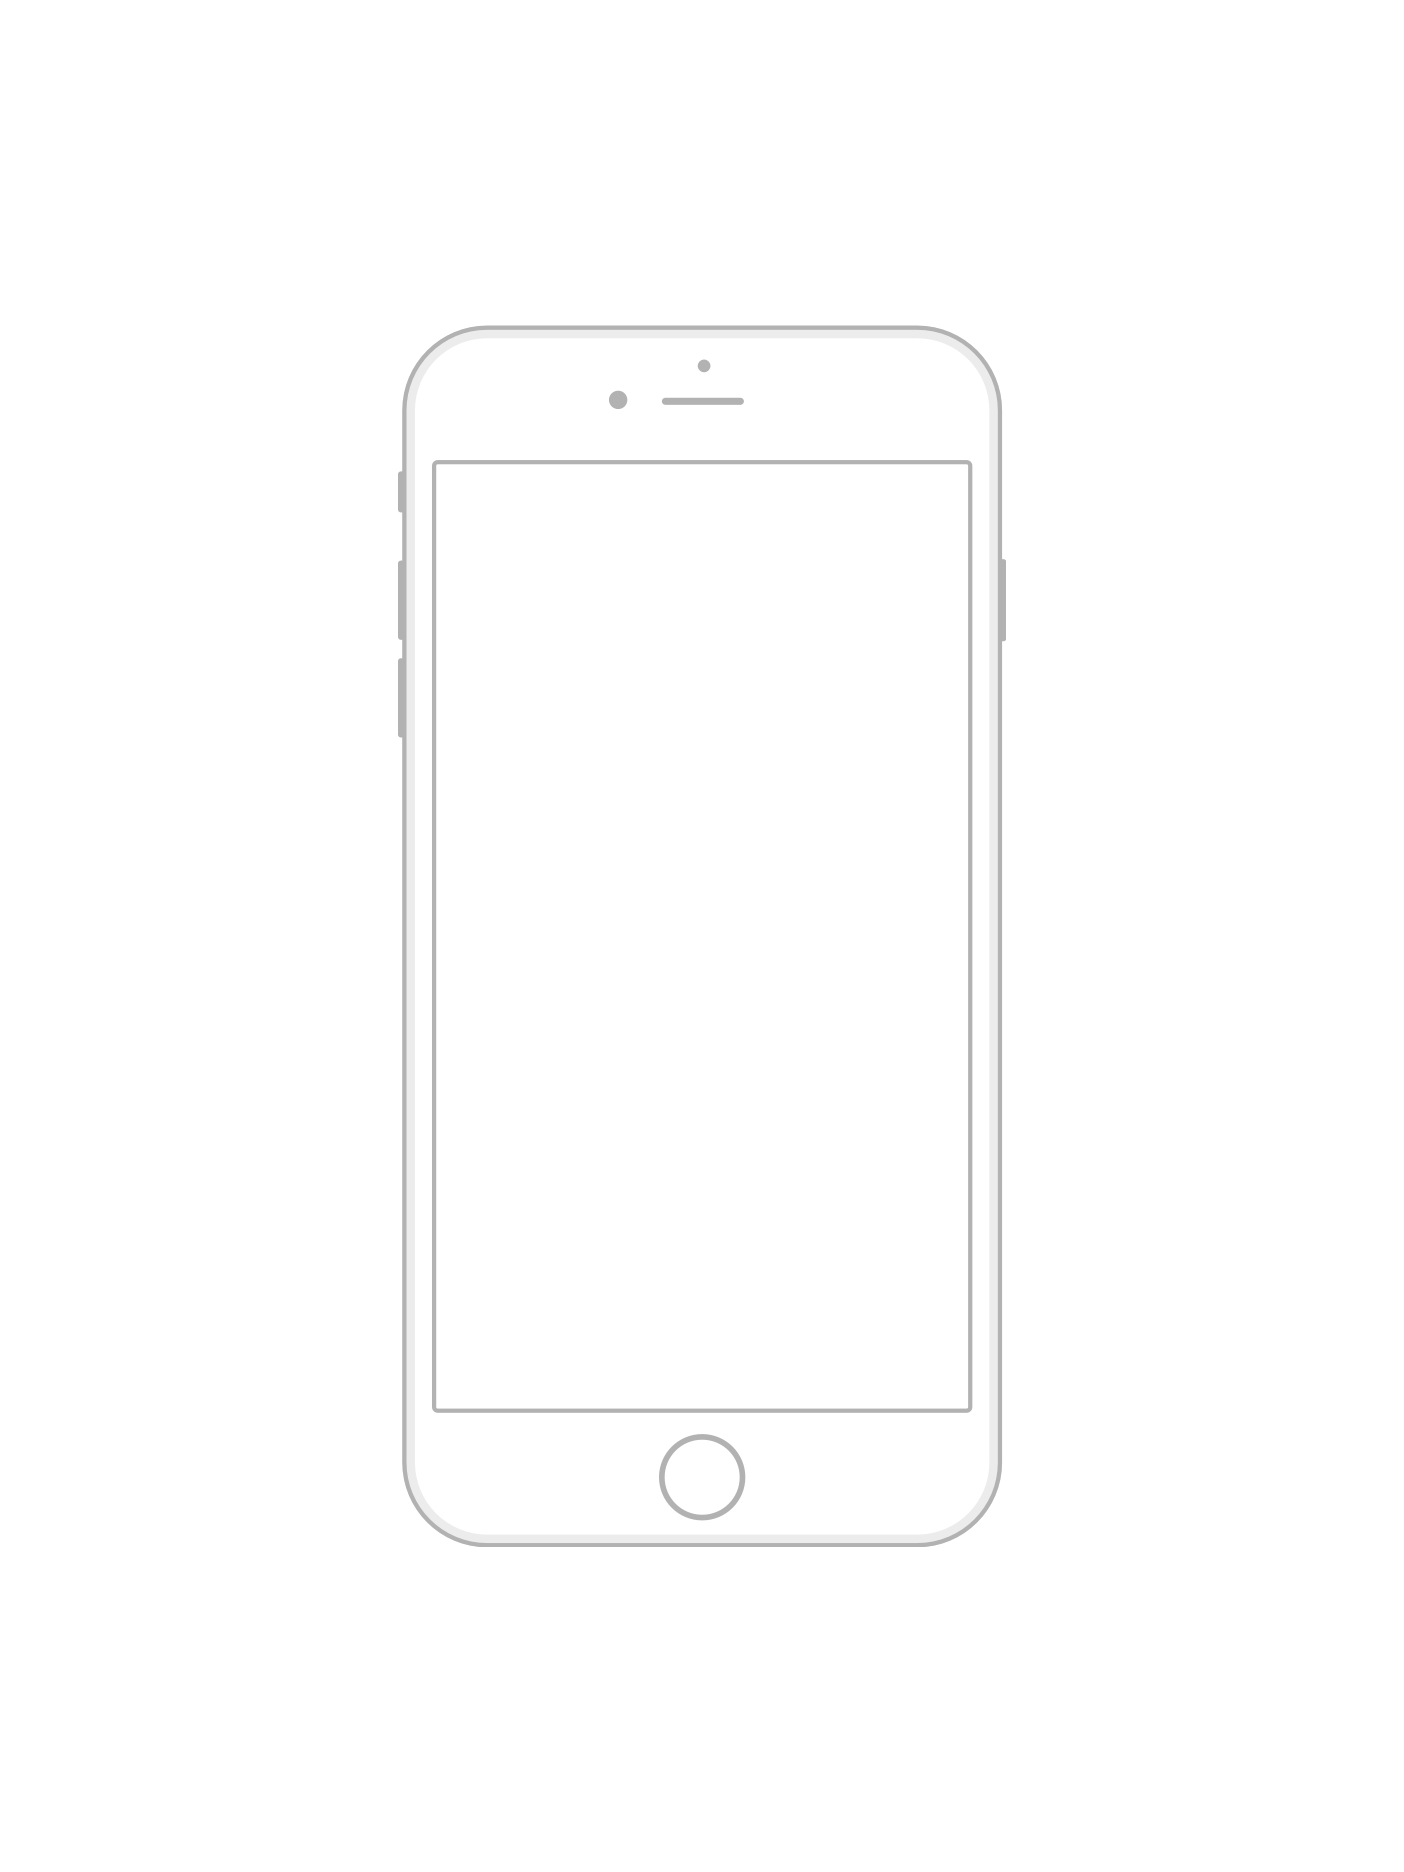 reMarkable iPhone Templates.